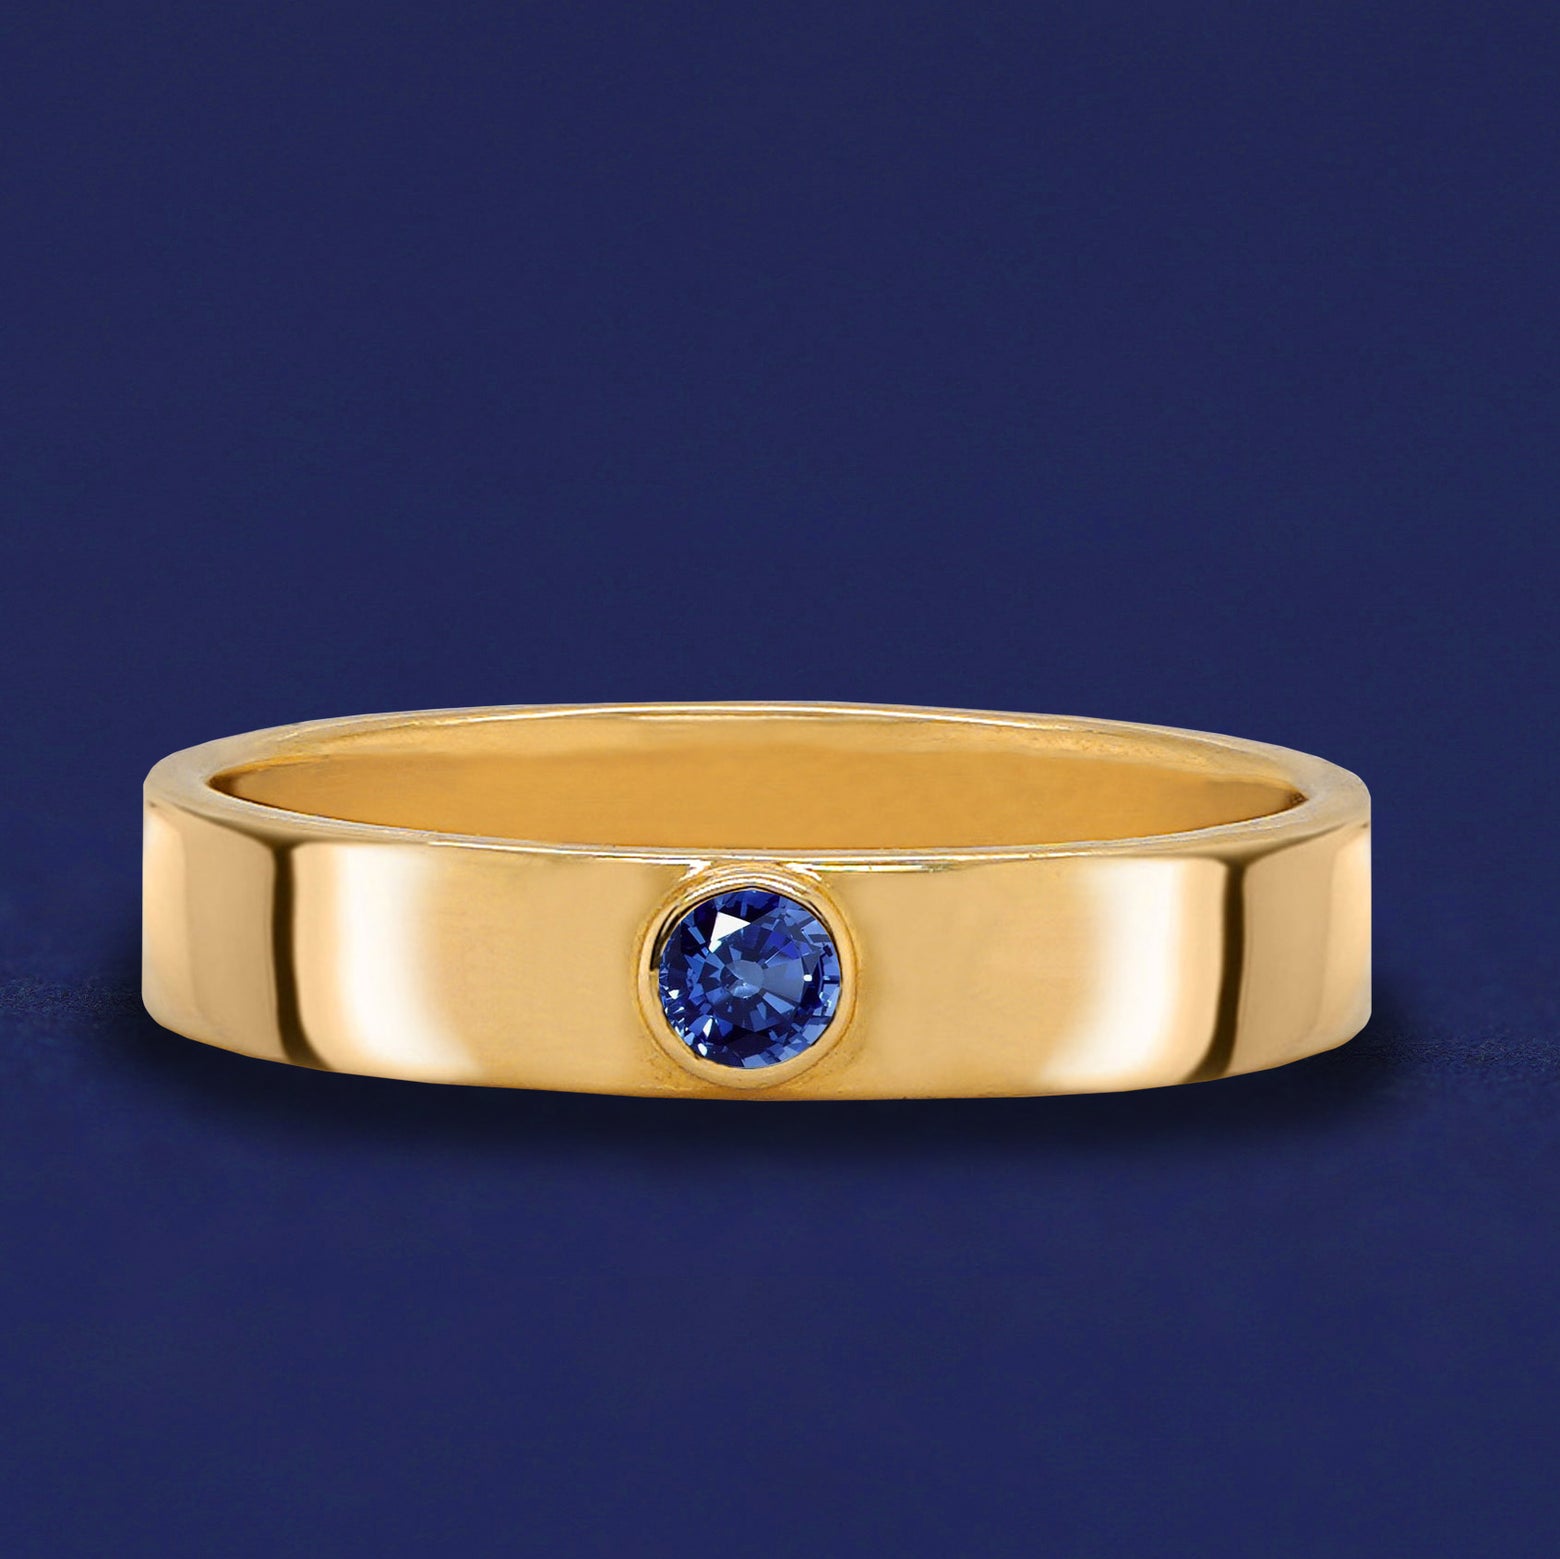 A 14 karat solid gold band ring with a bezel set sapphire gemstone